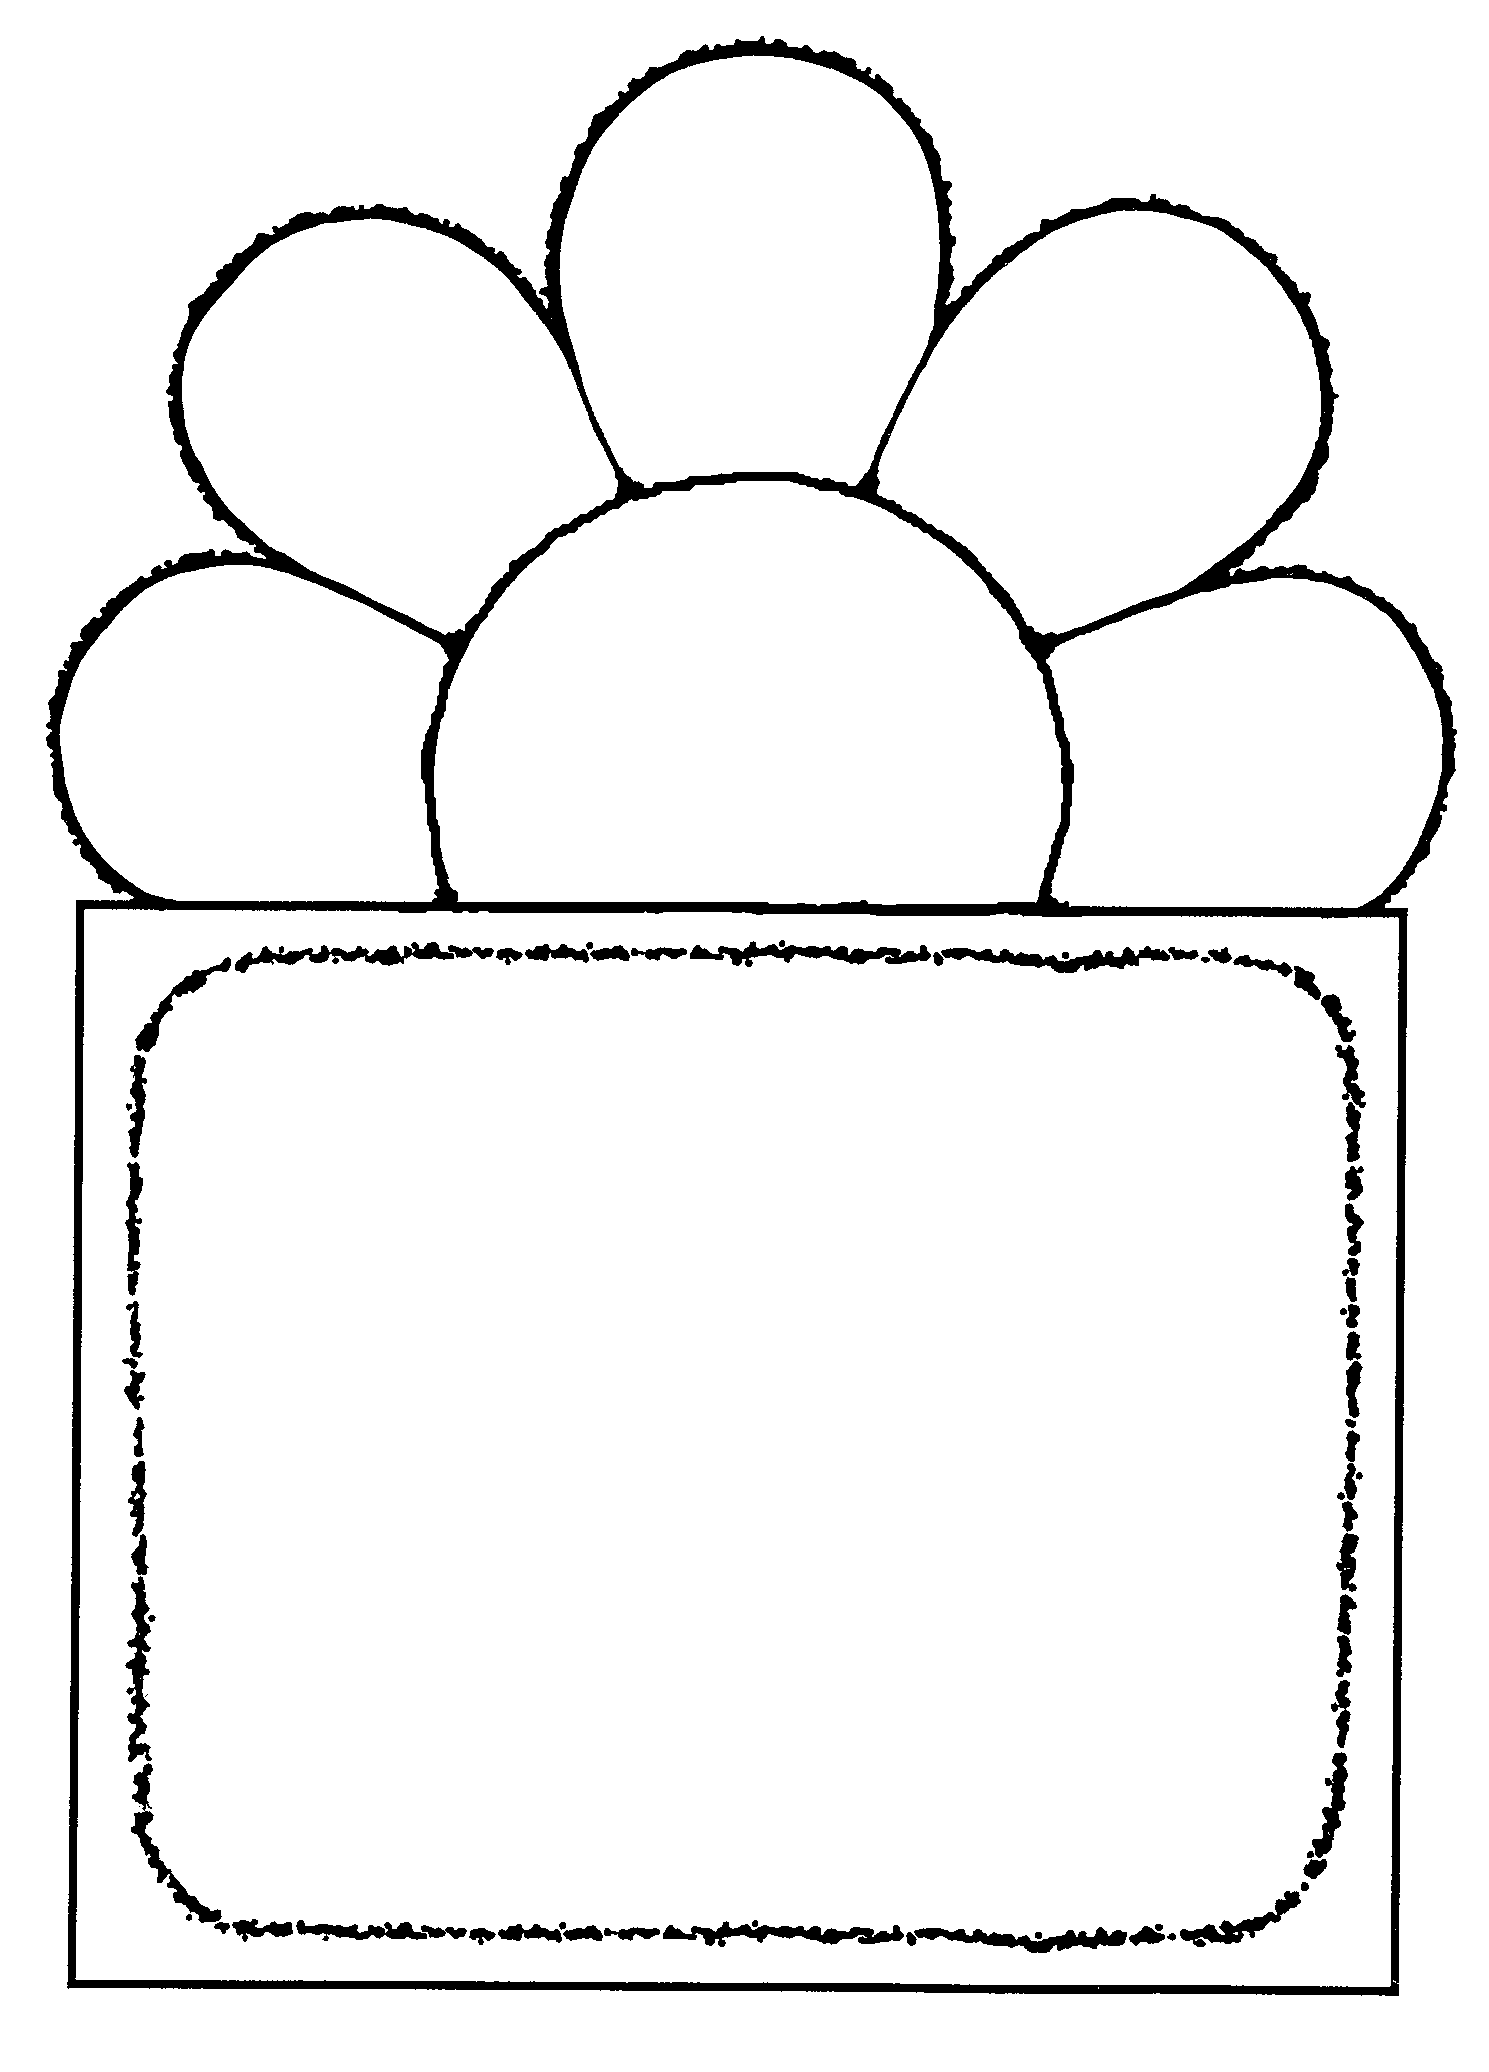 Fall Border Clipart Black And White | Clipart library - Free Clipart 